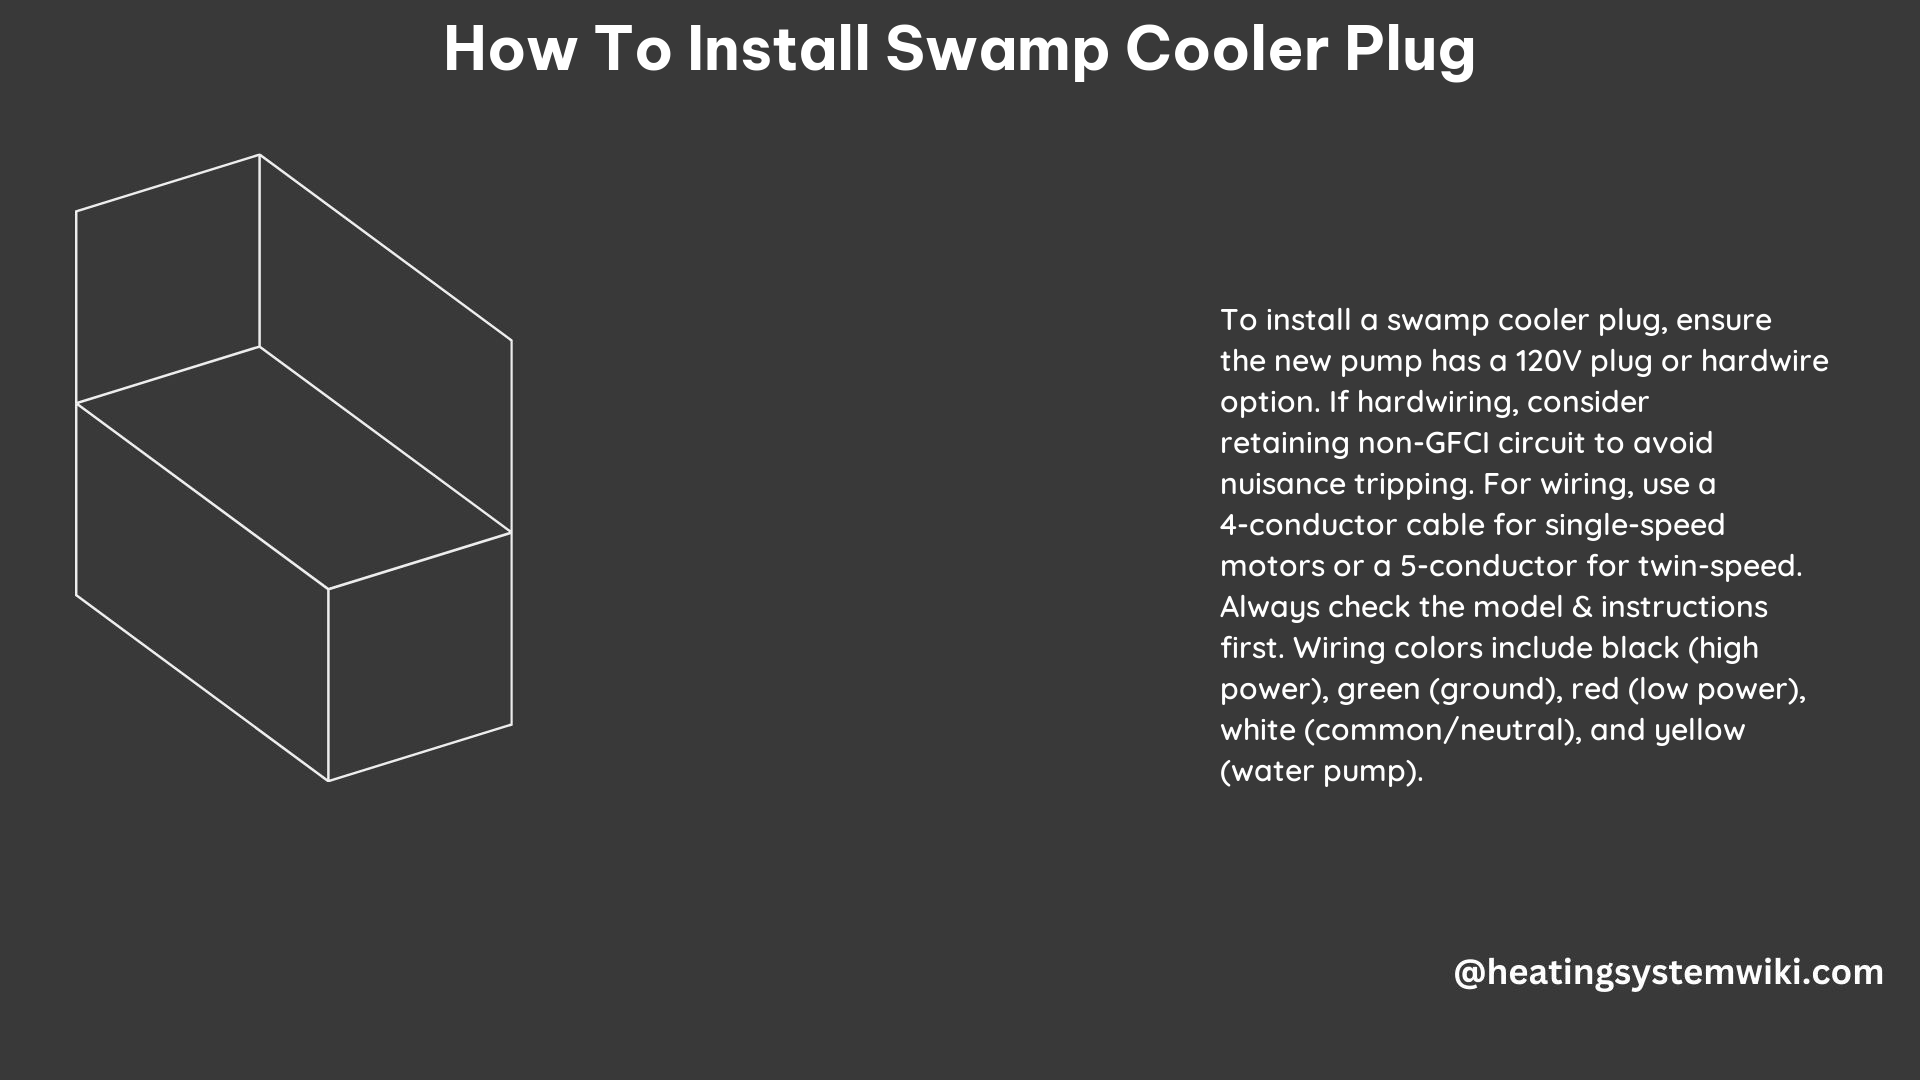 How to Install Swamp Cooler Plug